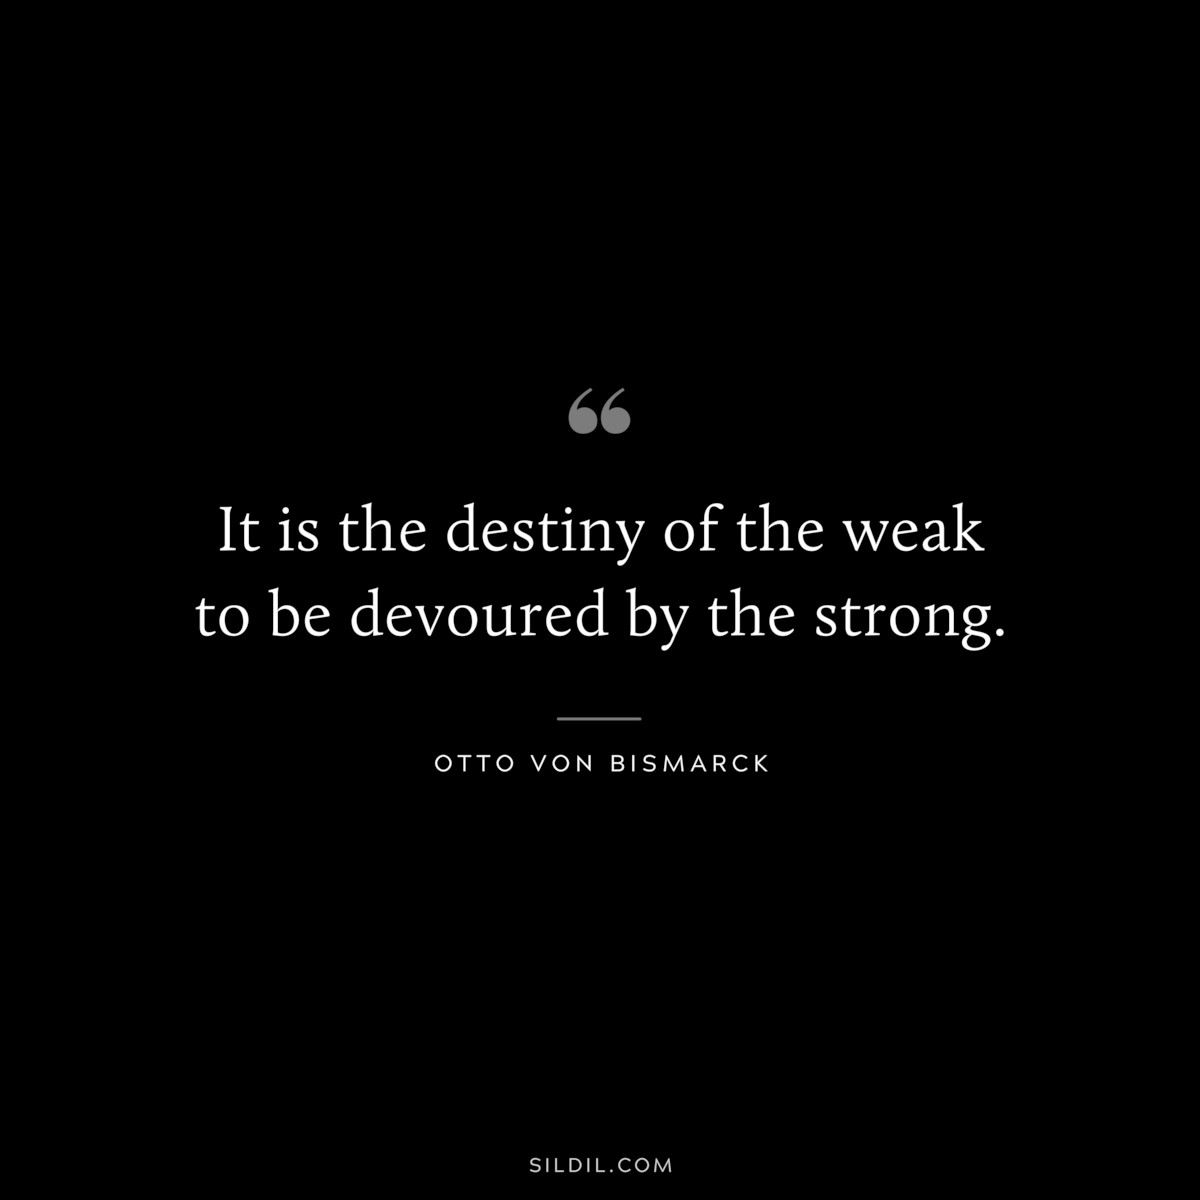 It is the destiny of the weak to be devoured by the strong. ― Otto von Bismarck